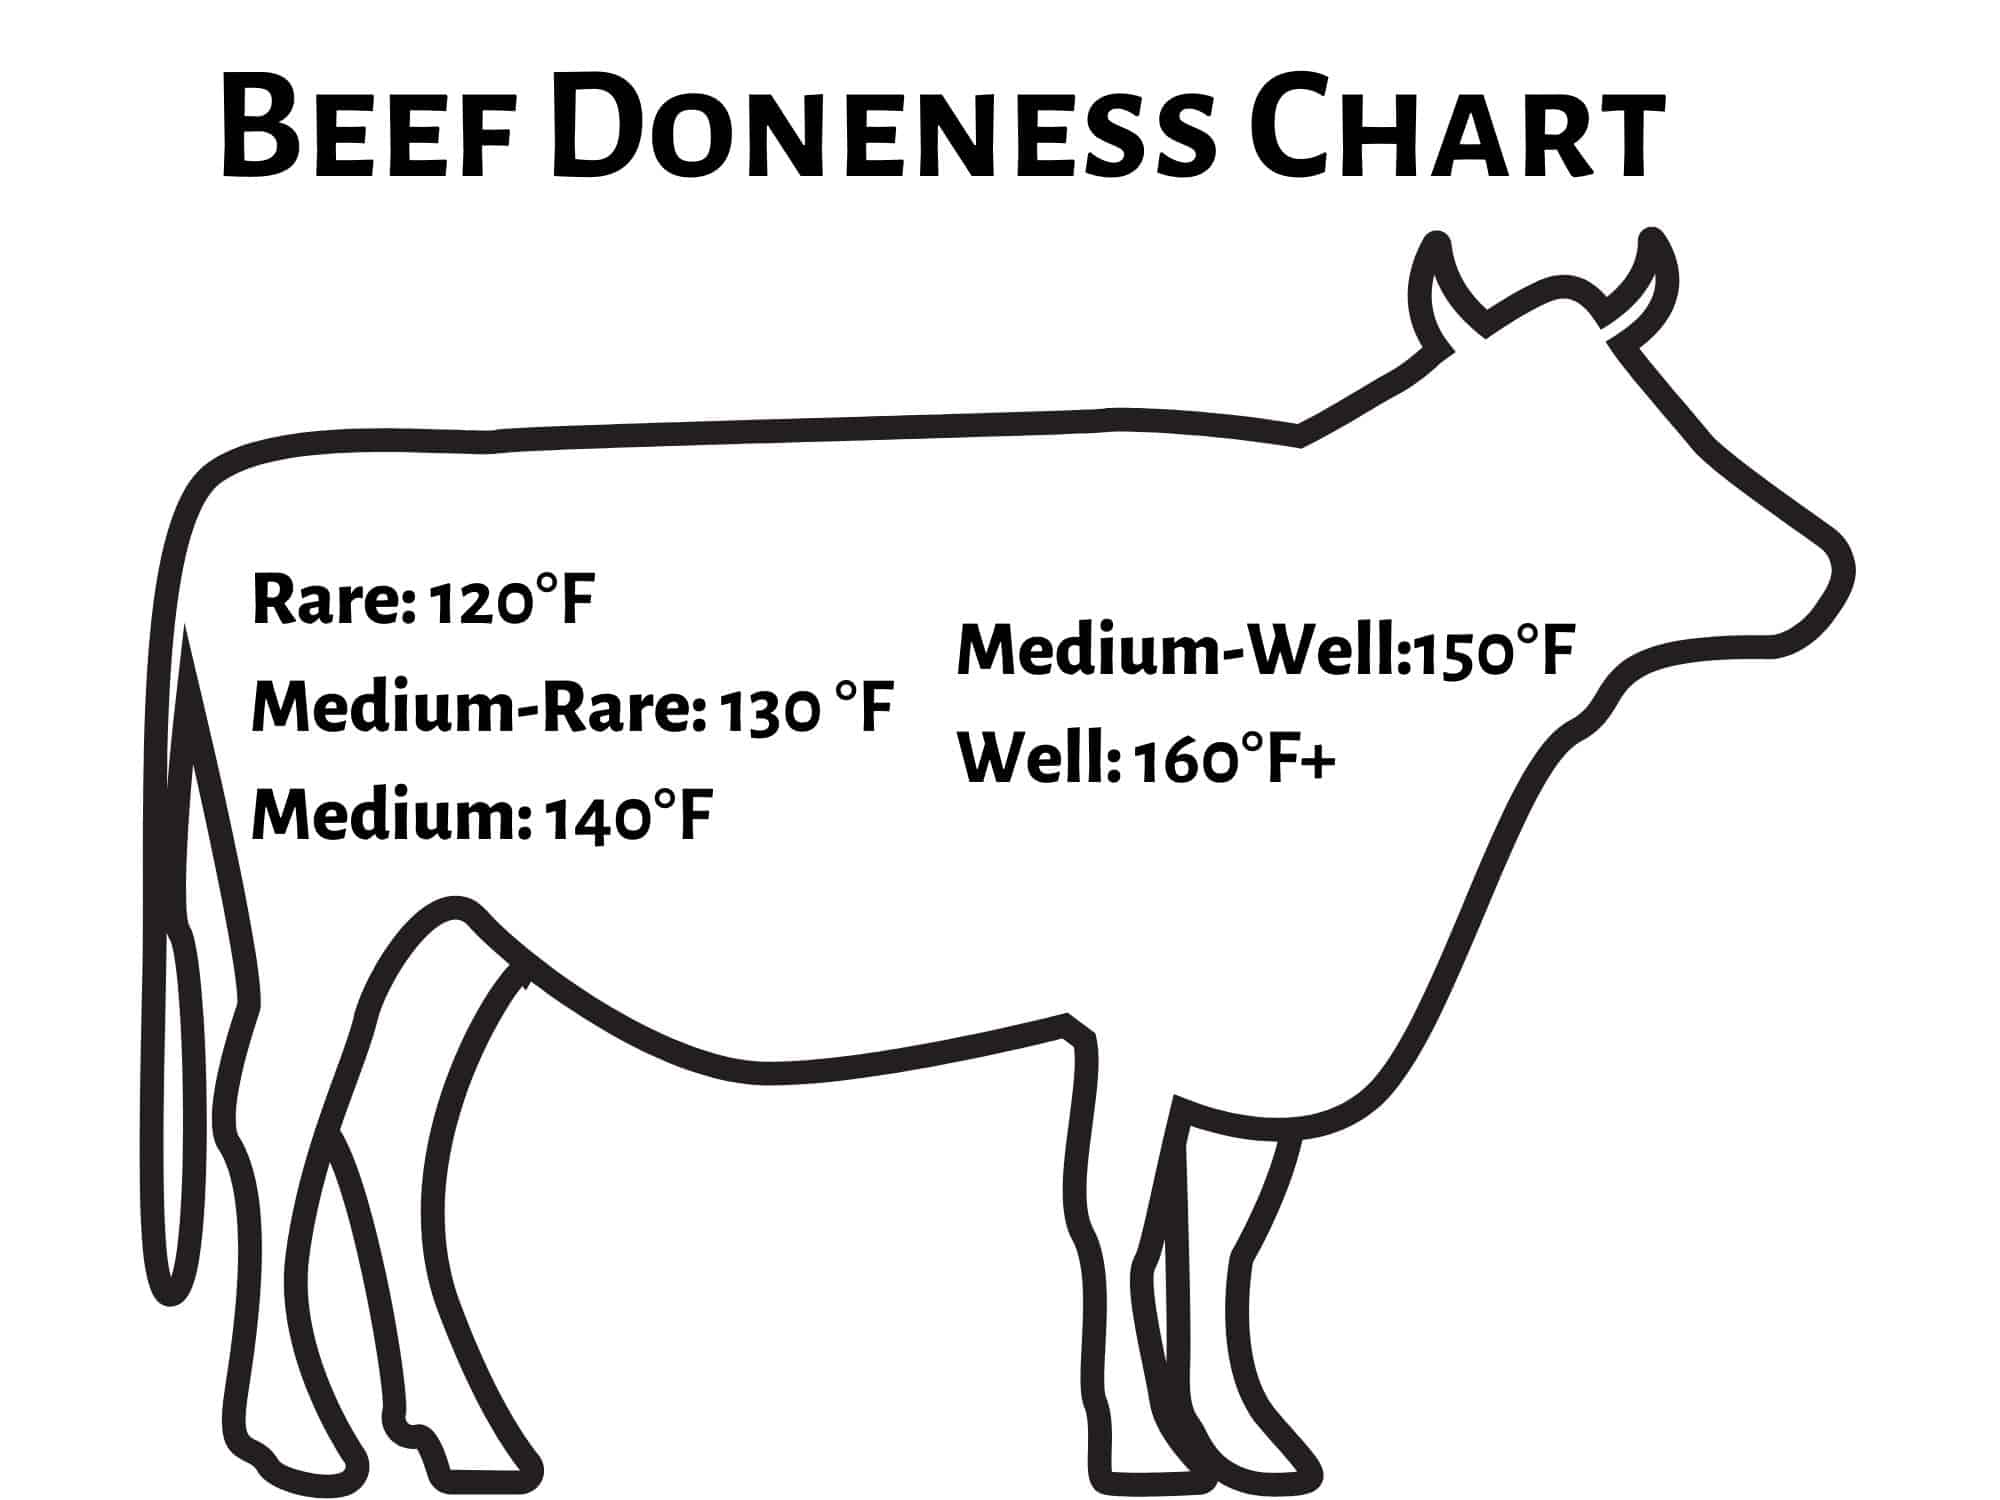 Beef internal temperature doneness chart with the outline of a bull.